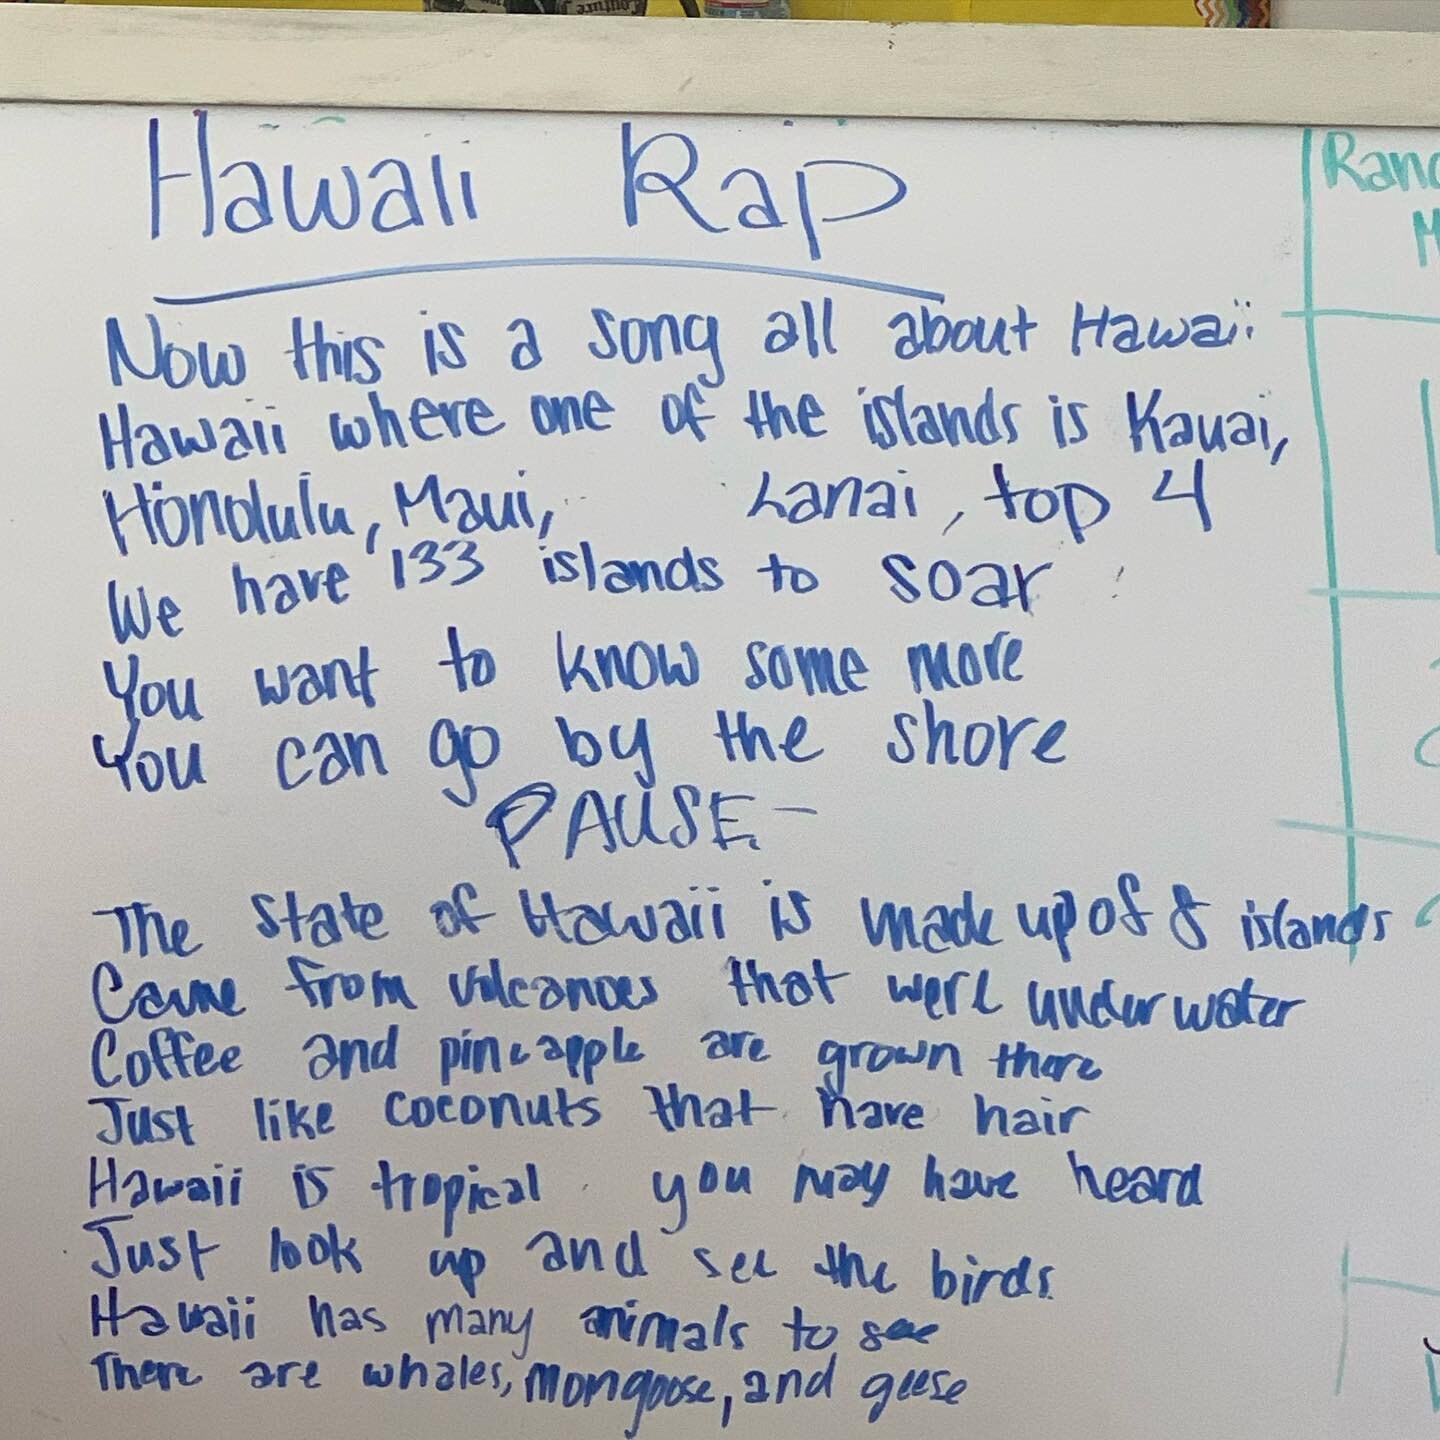 Swipe ➡️to see our students in action. This week we had a Hawaiian Theme for camp 🌺. Our students learned facts about Hawaii and put them together to create a rap. Our staff are constantly thinking of creative ways to make learning FUN! Ms. Samara d